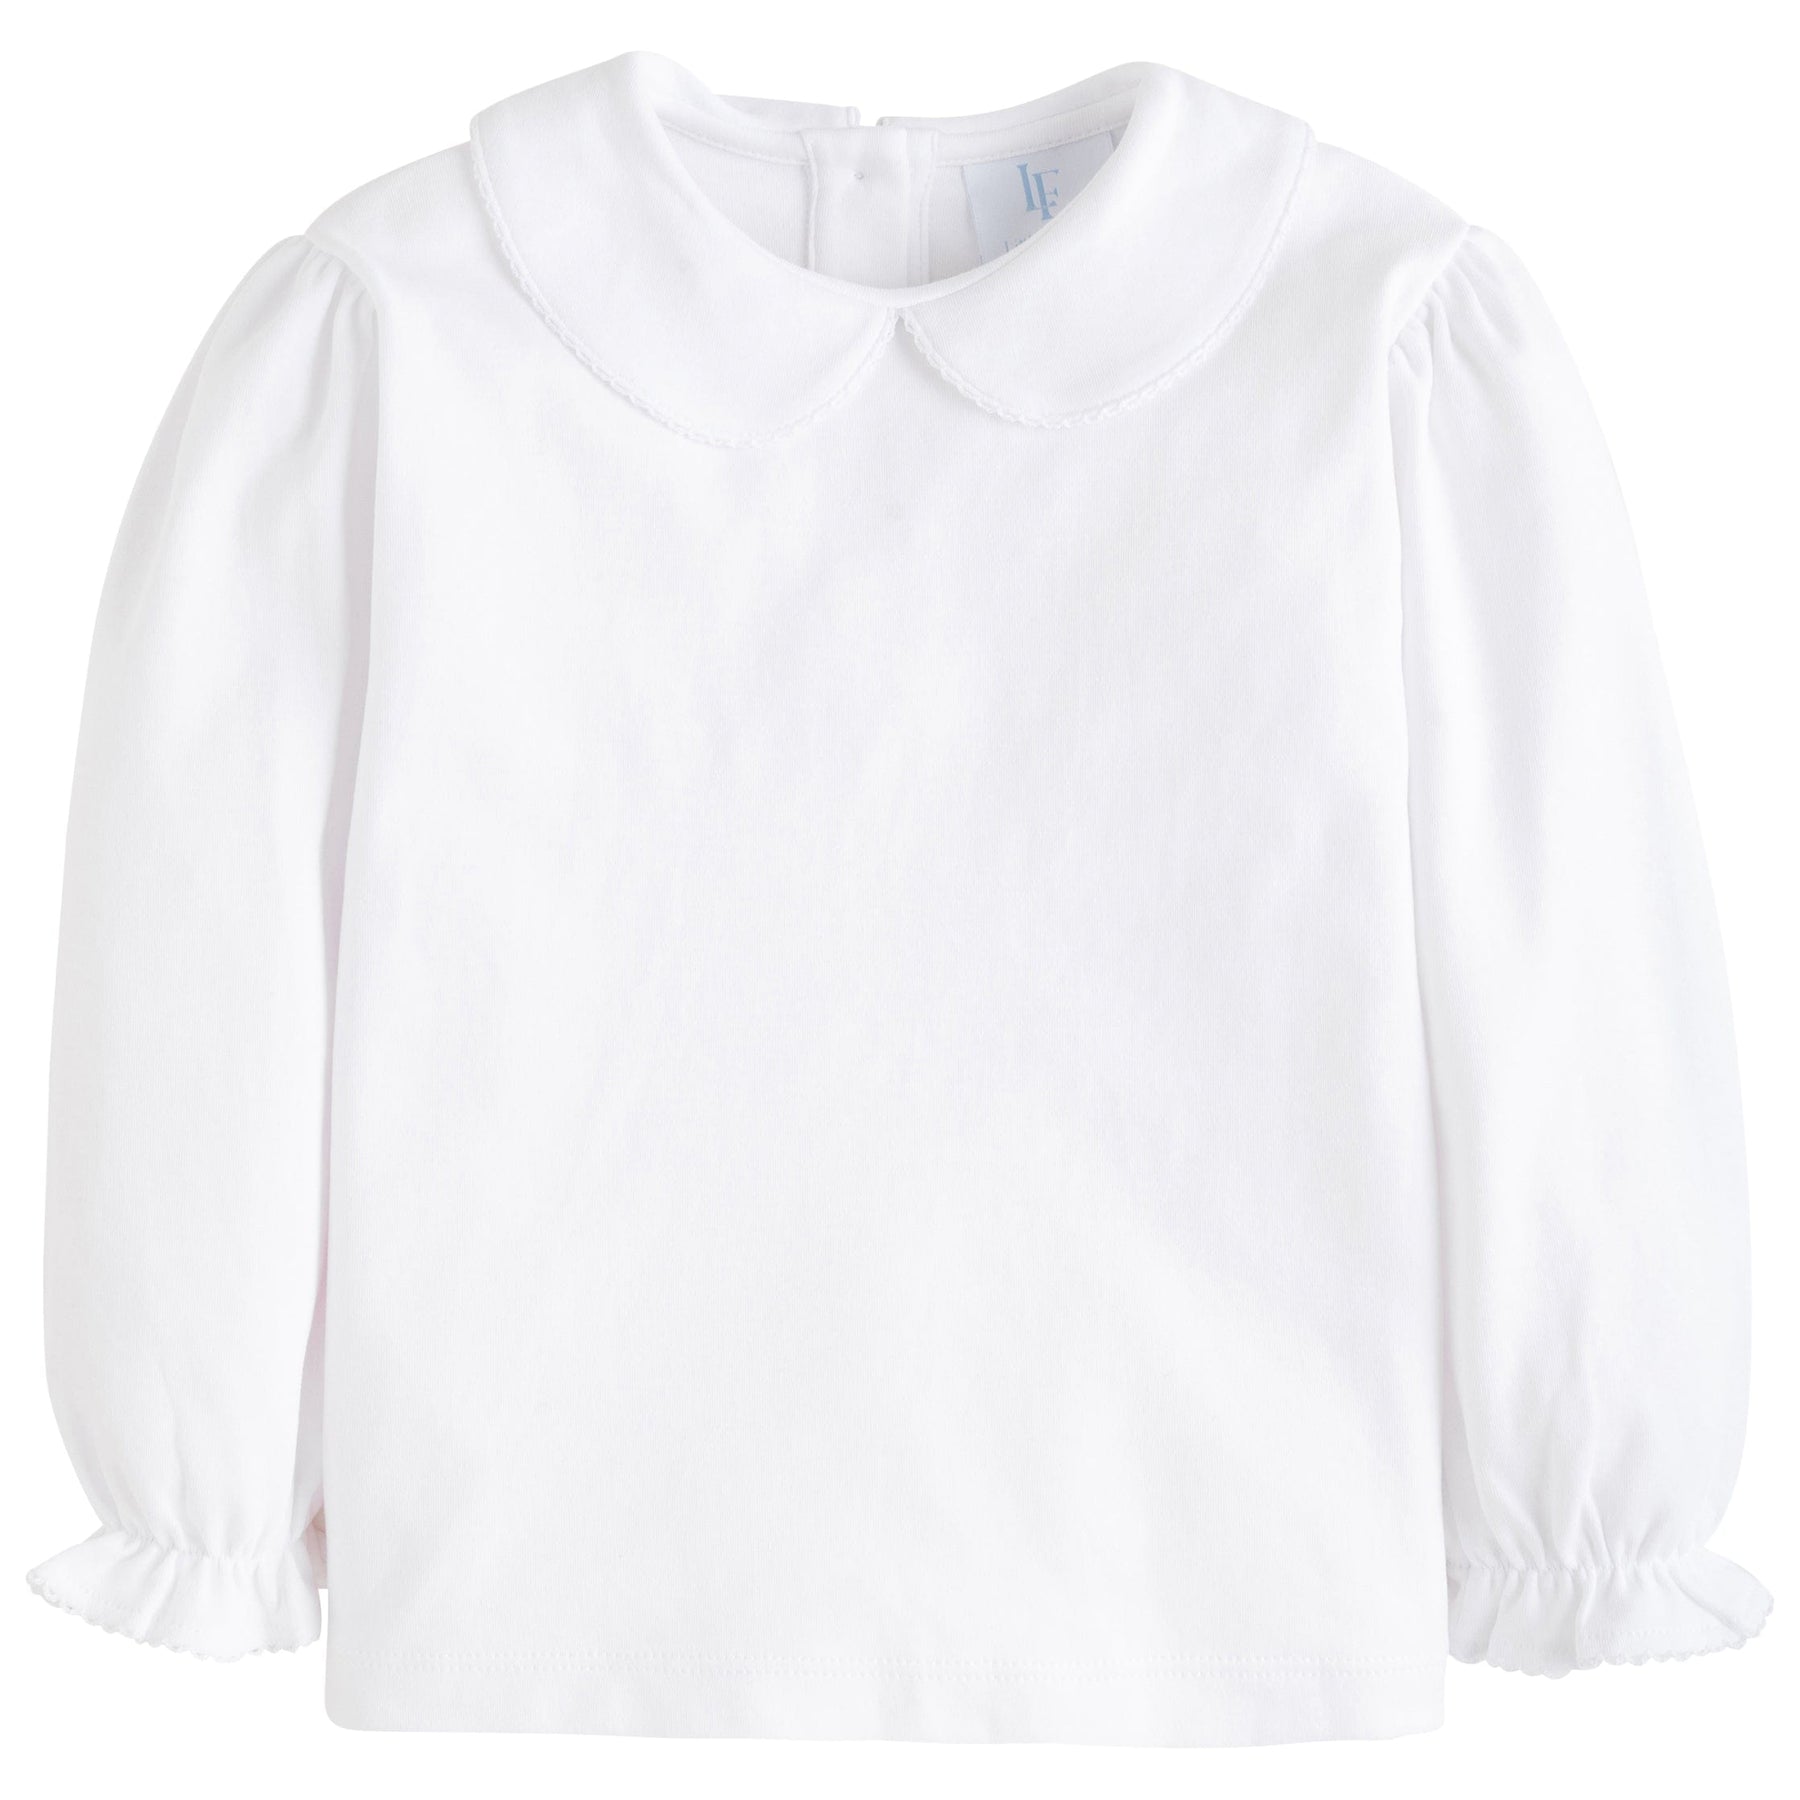 seguridadindustrialcr classic childrens clothing white blouse with white picot trim